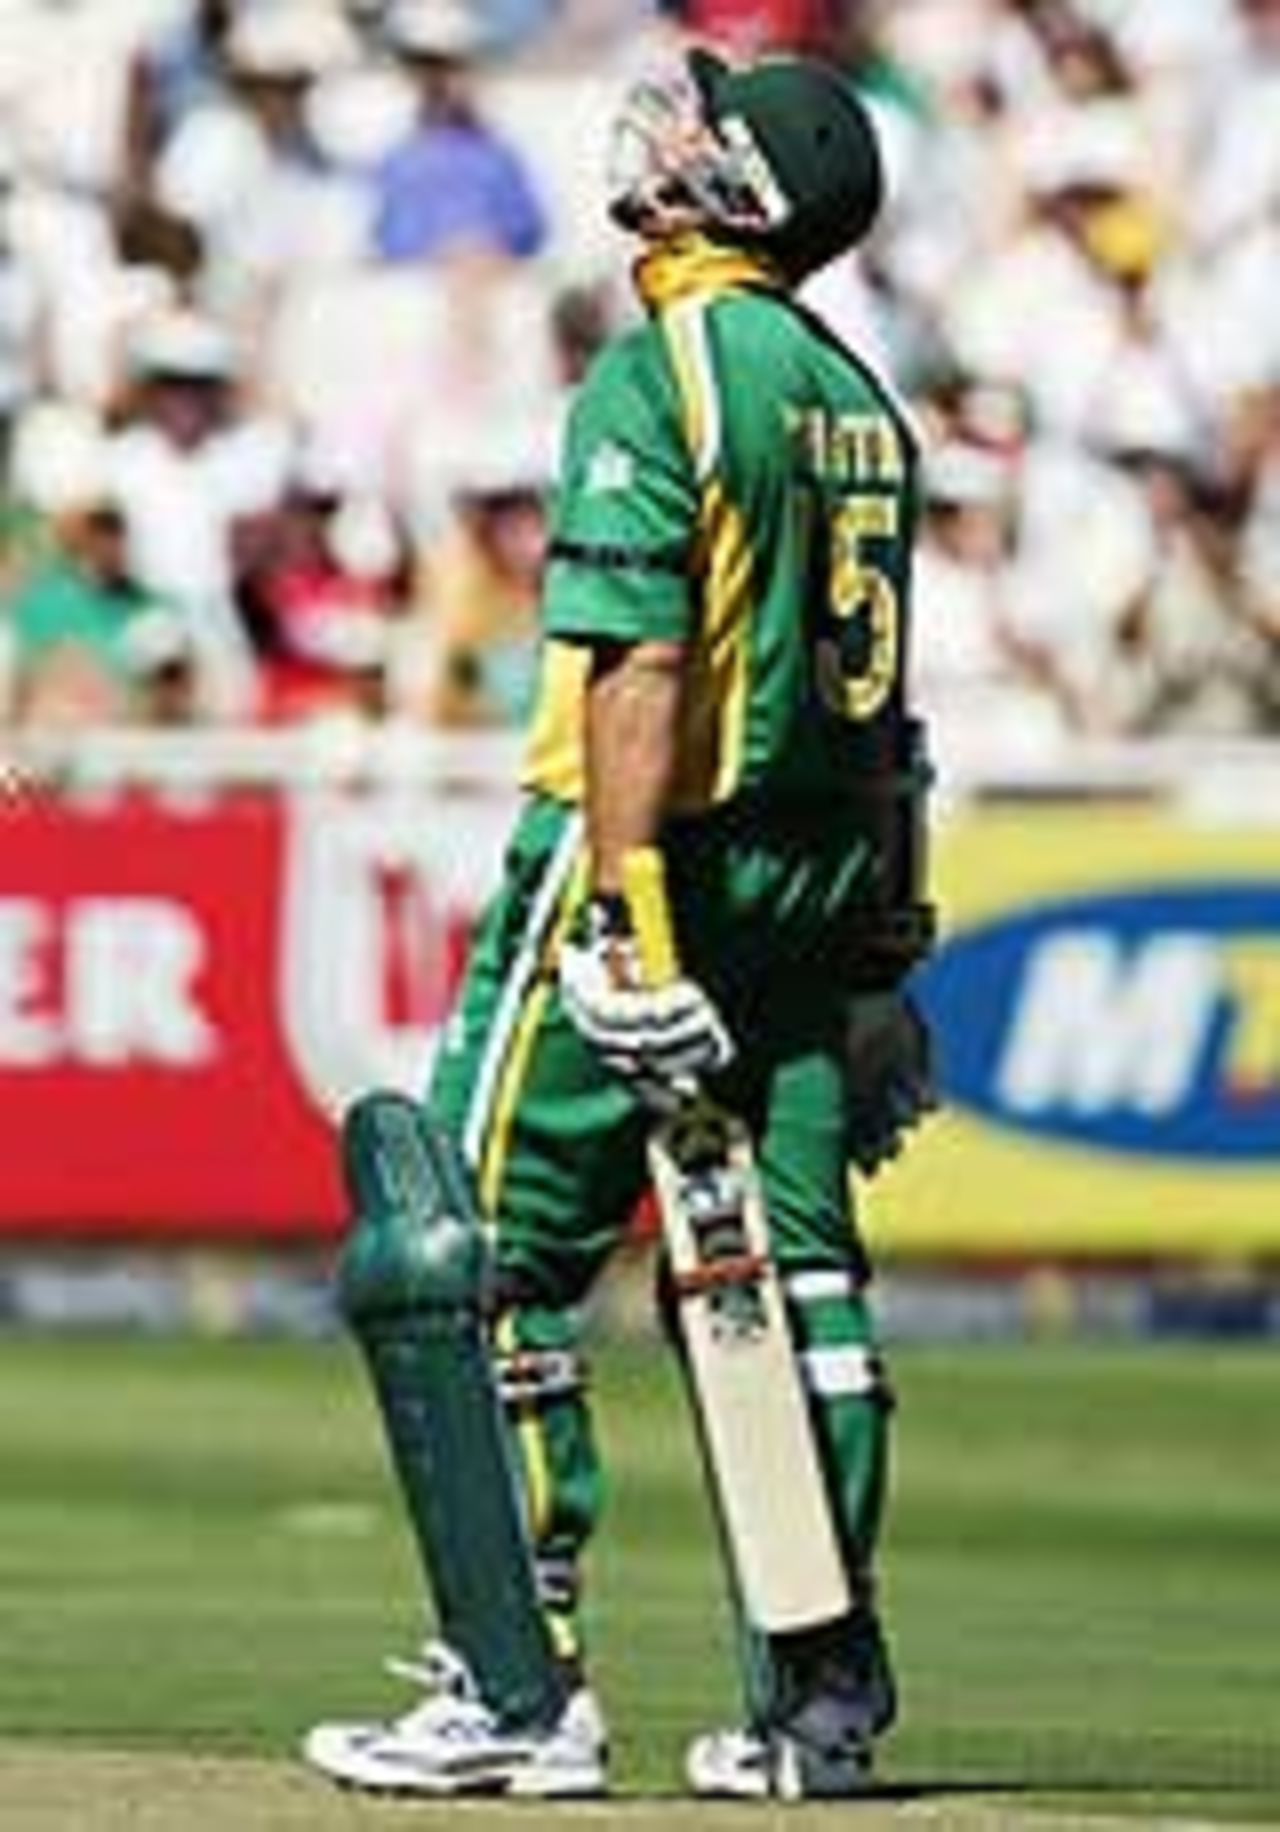 Graeme Smith looks to the heavens as Kabir Ali traps him lbw, in the fourth ODI at Newlands, South Africa v England, Port Elizabeth, February 4, 2005